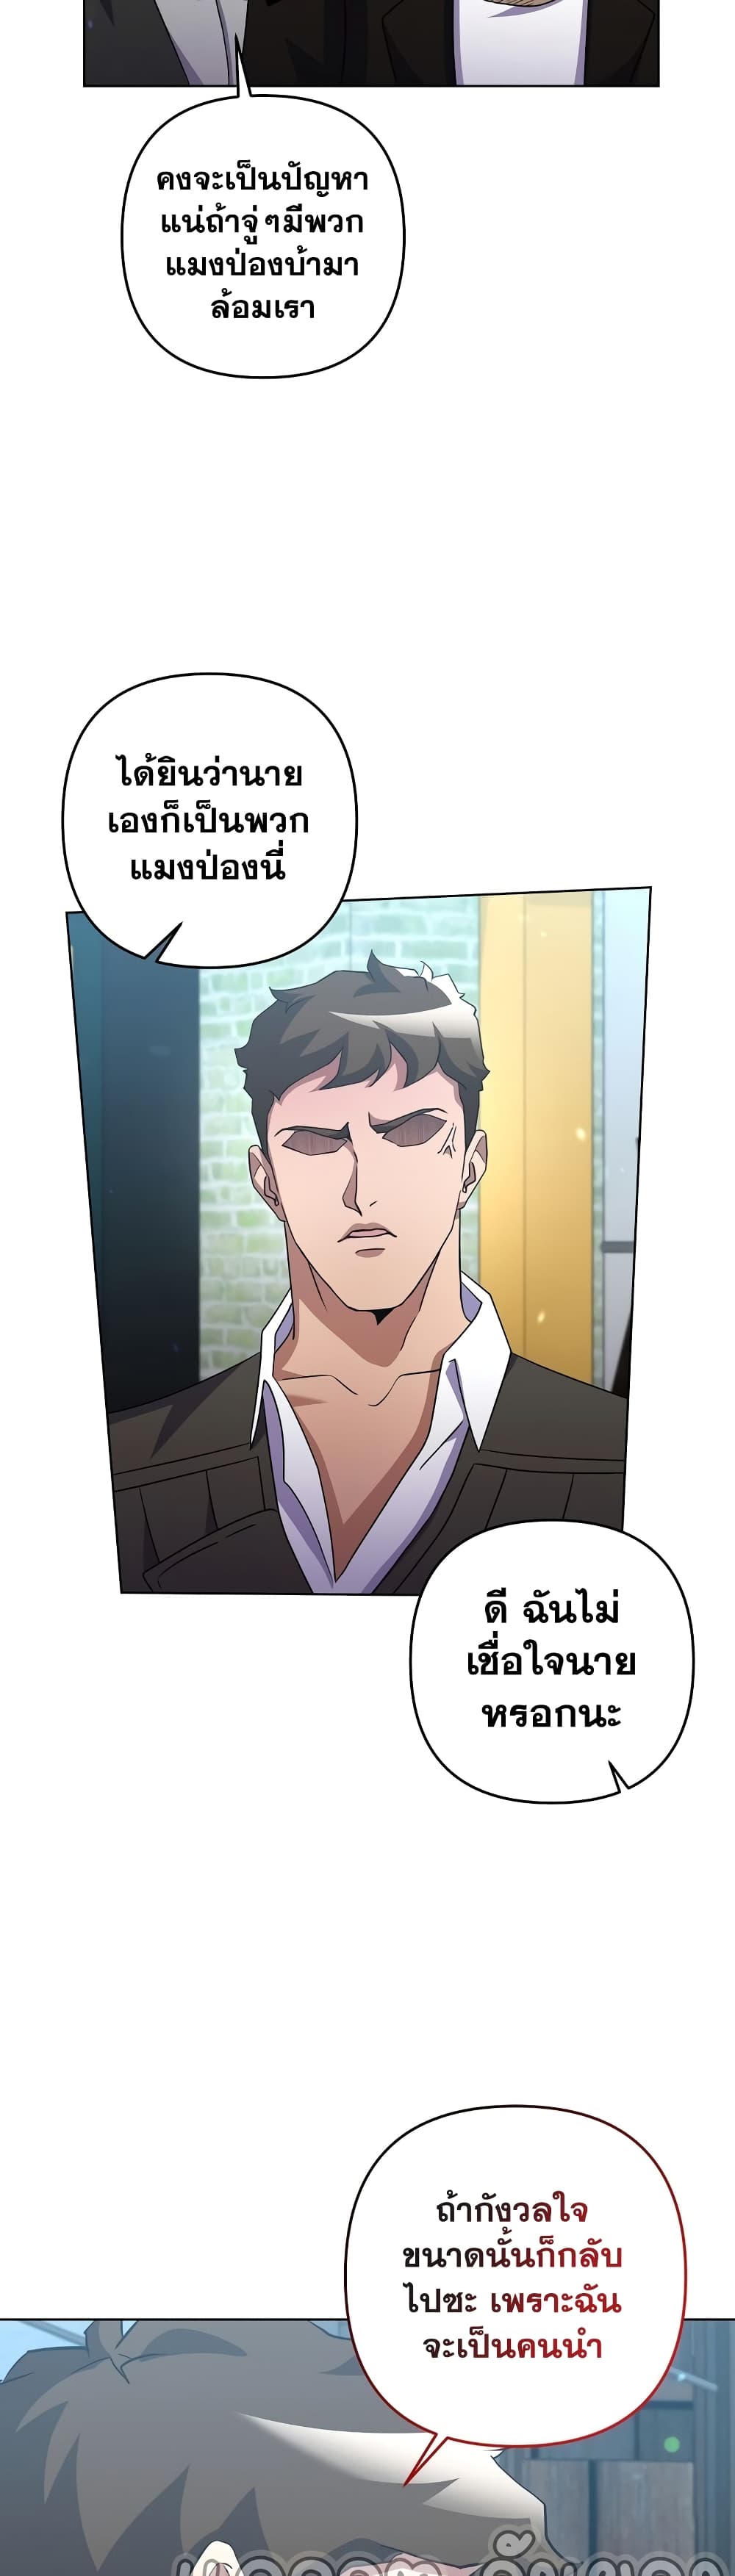 Surviving in an Action Manhwa 22-22